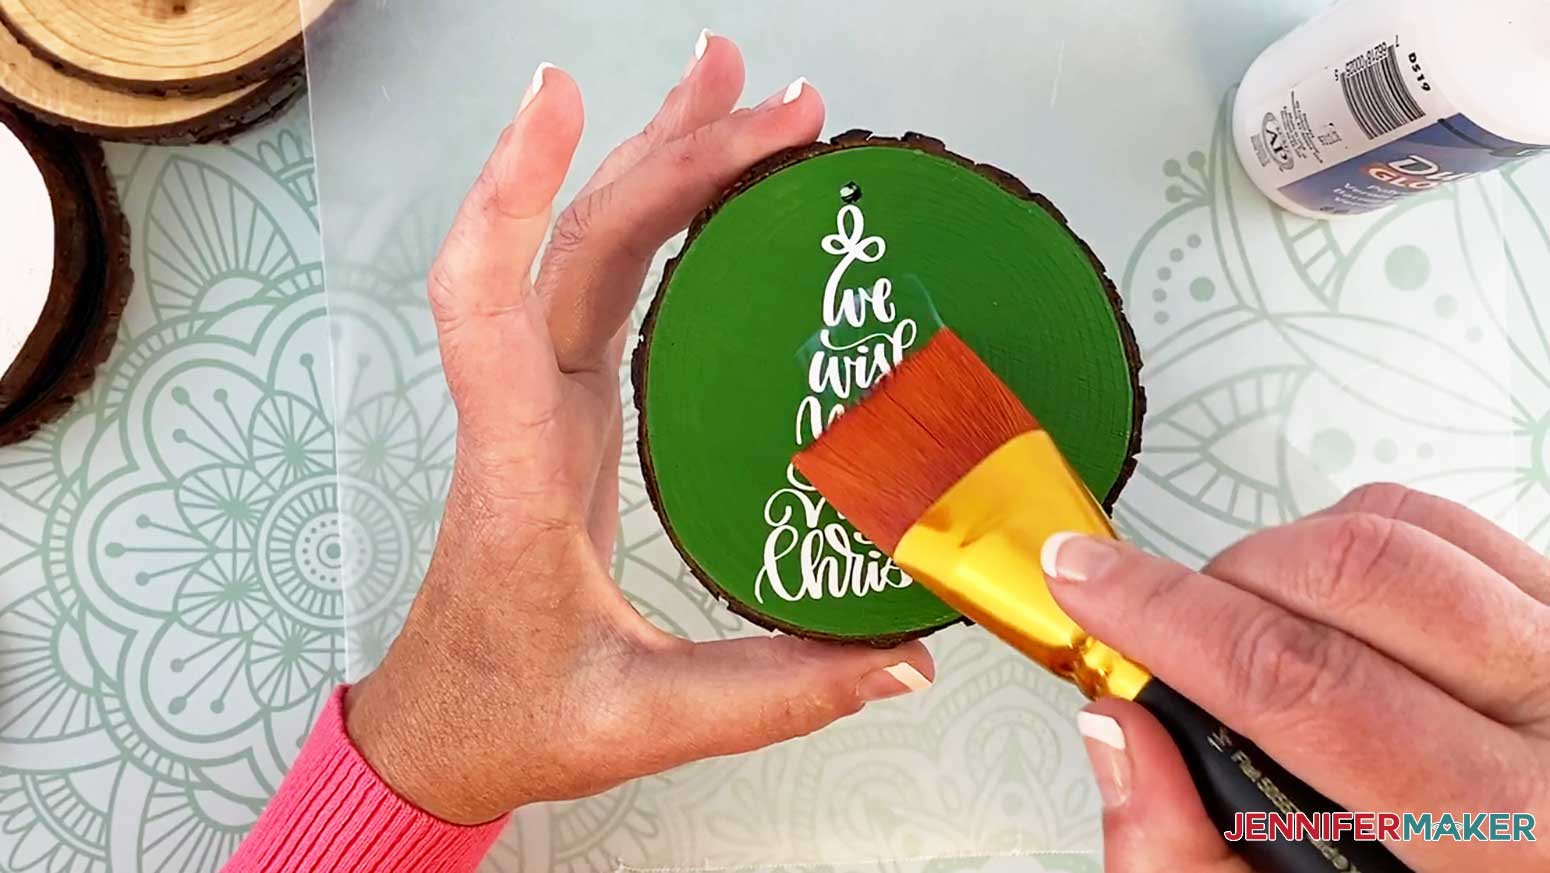 Paint duraclear over the wood slice ornament to protect it